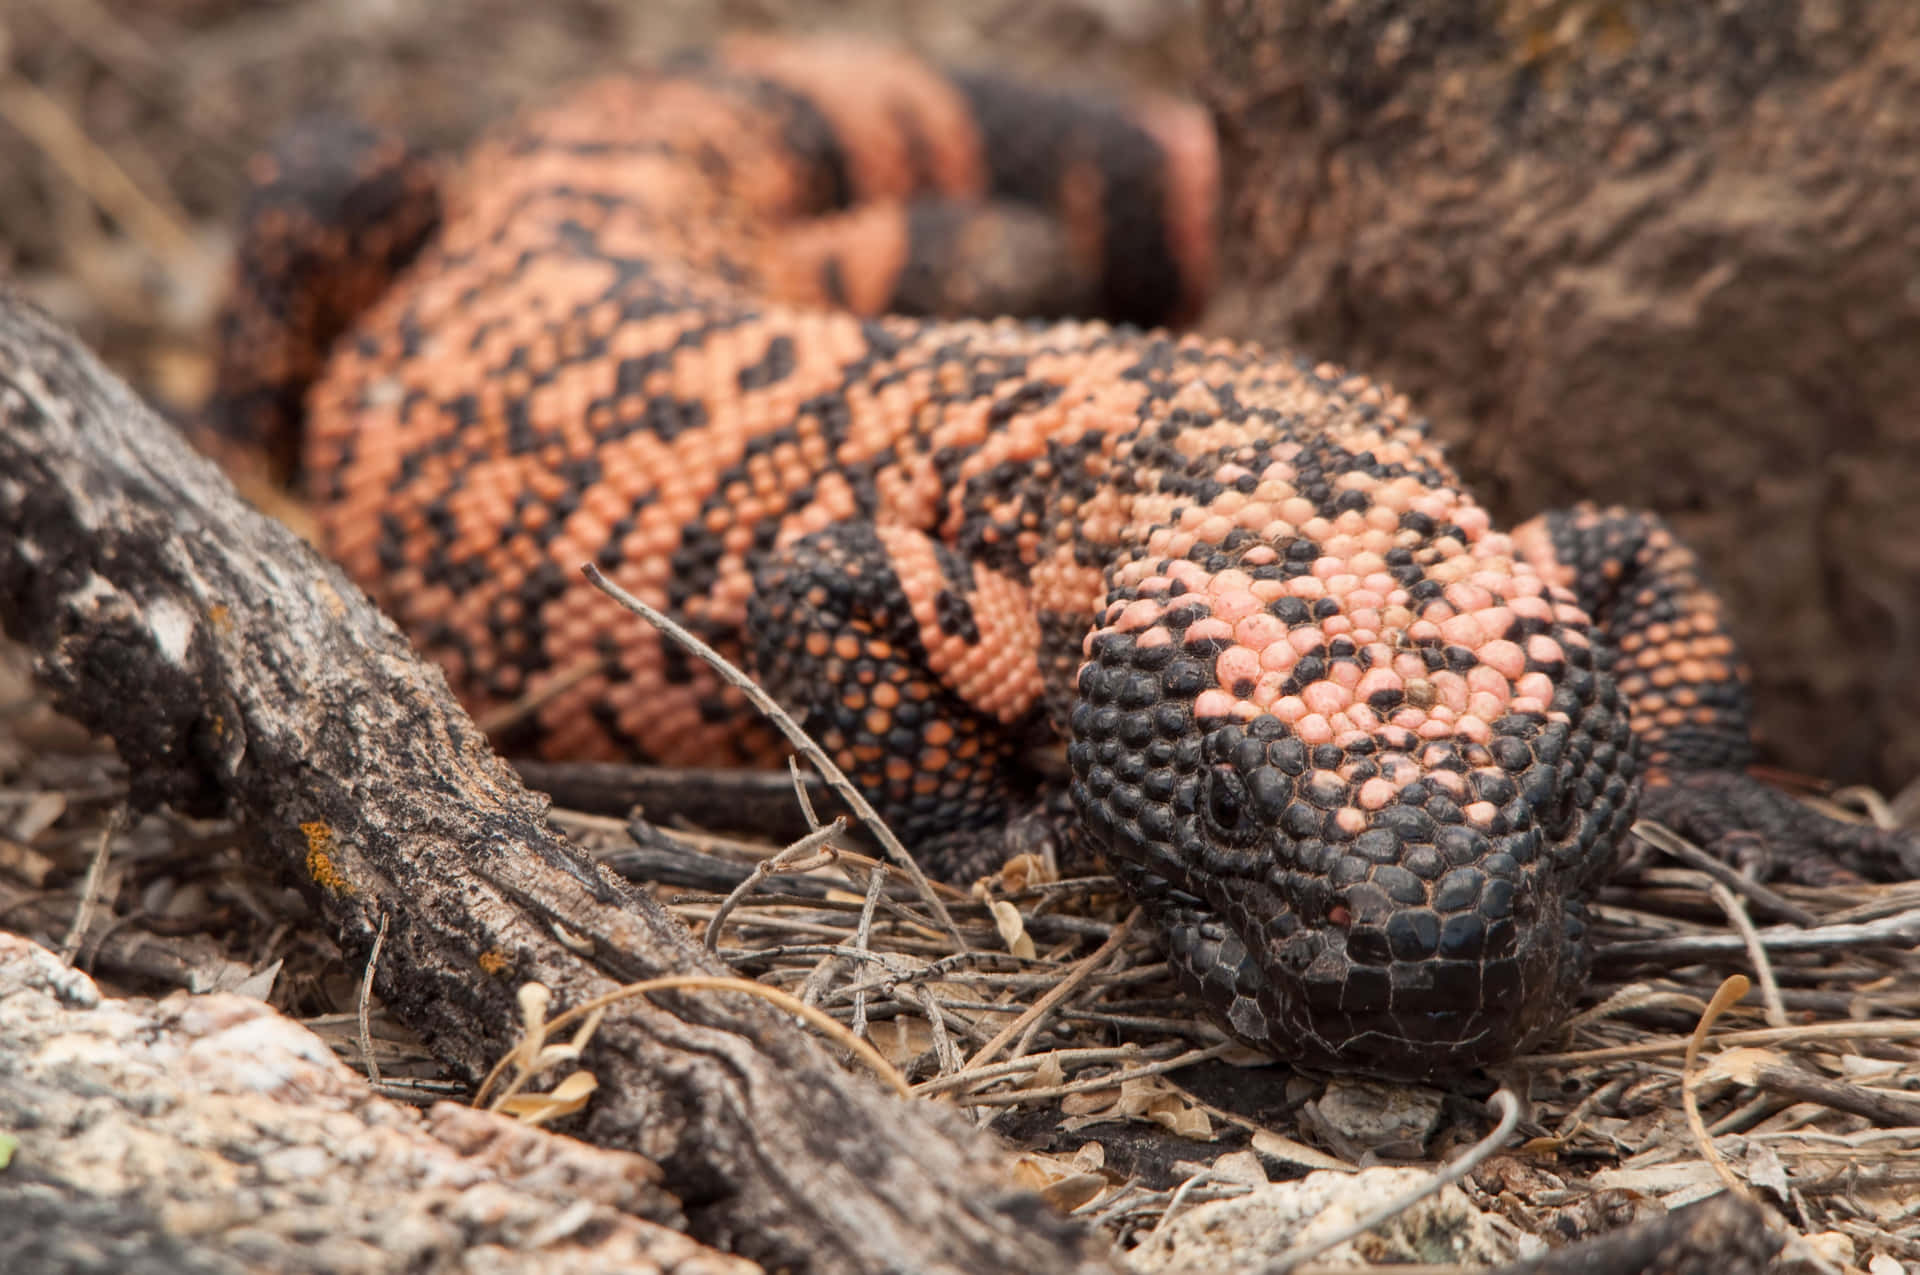 A Lizard With Black Spots And Orange Spots